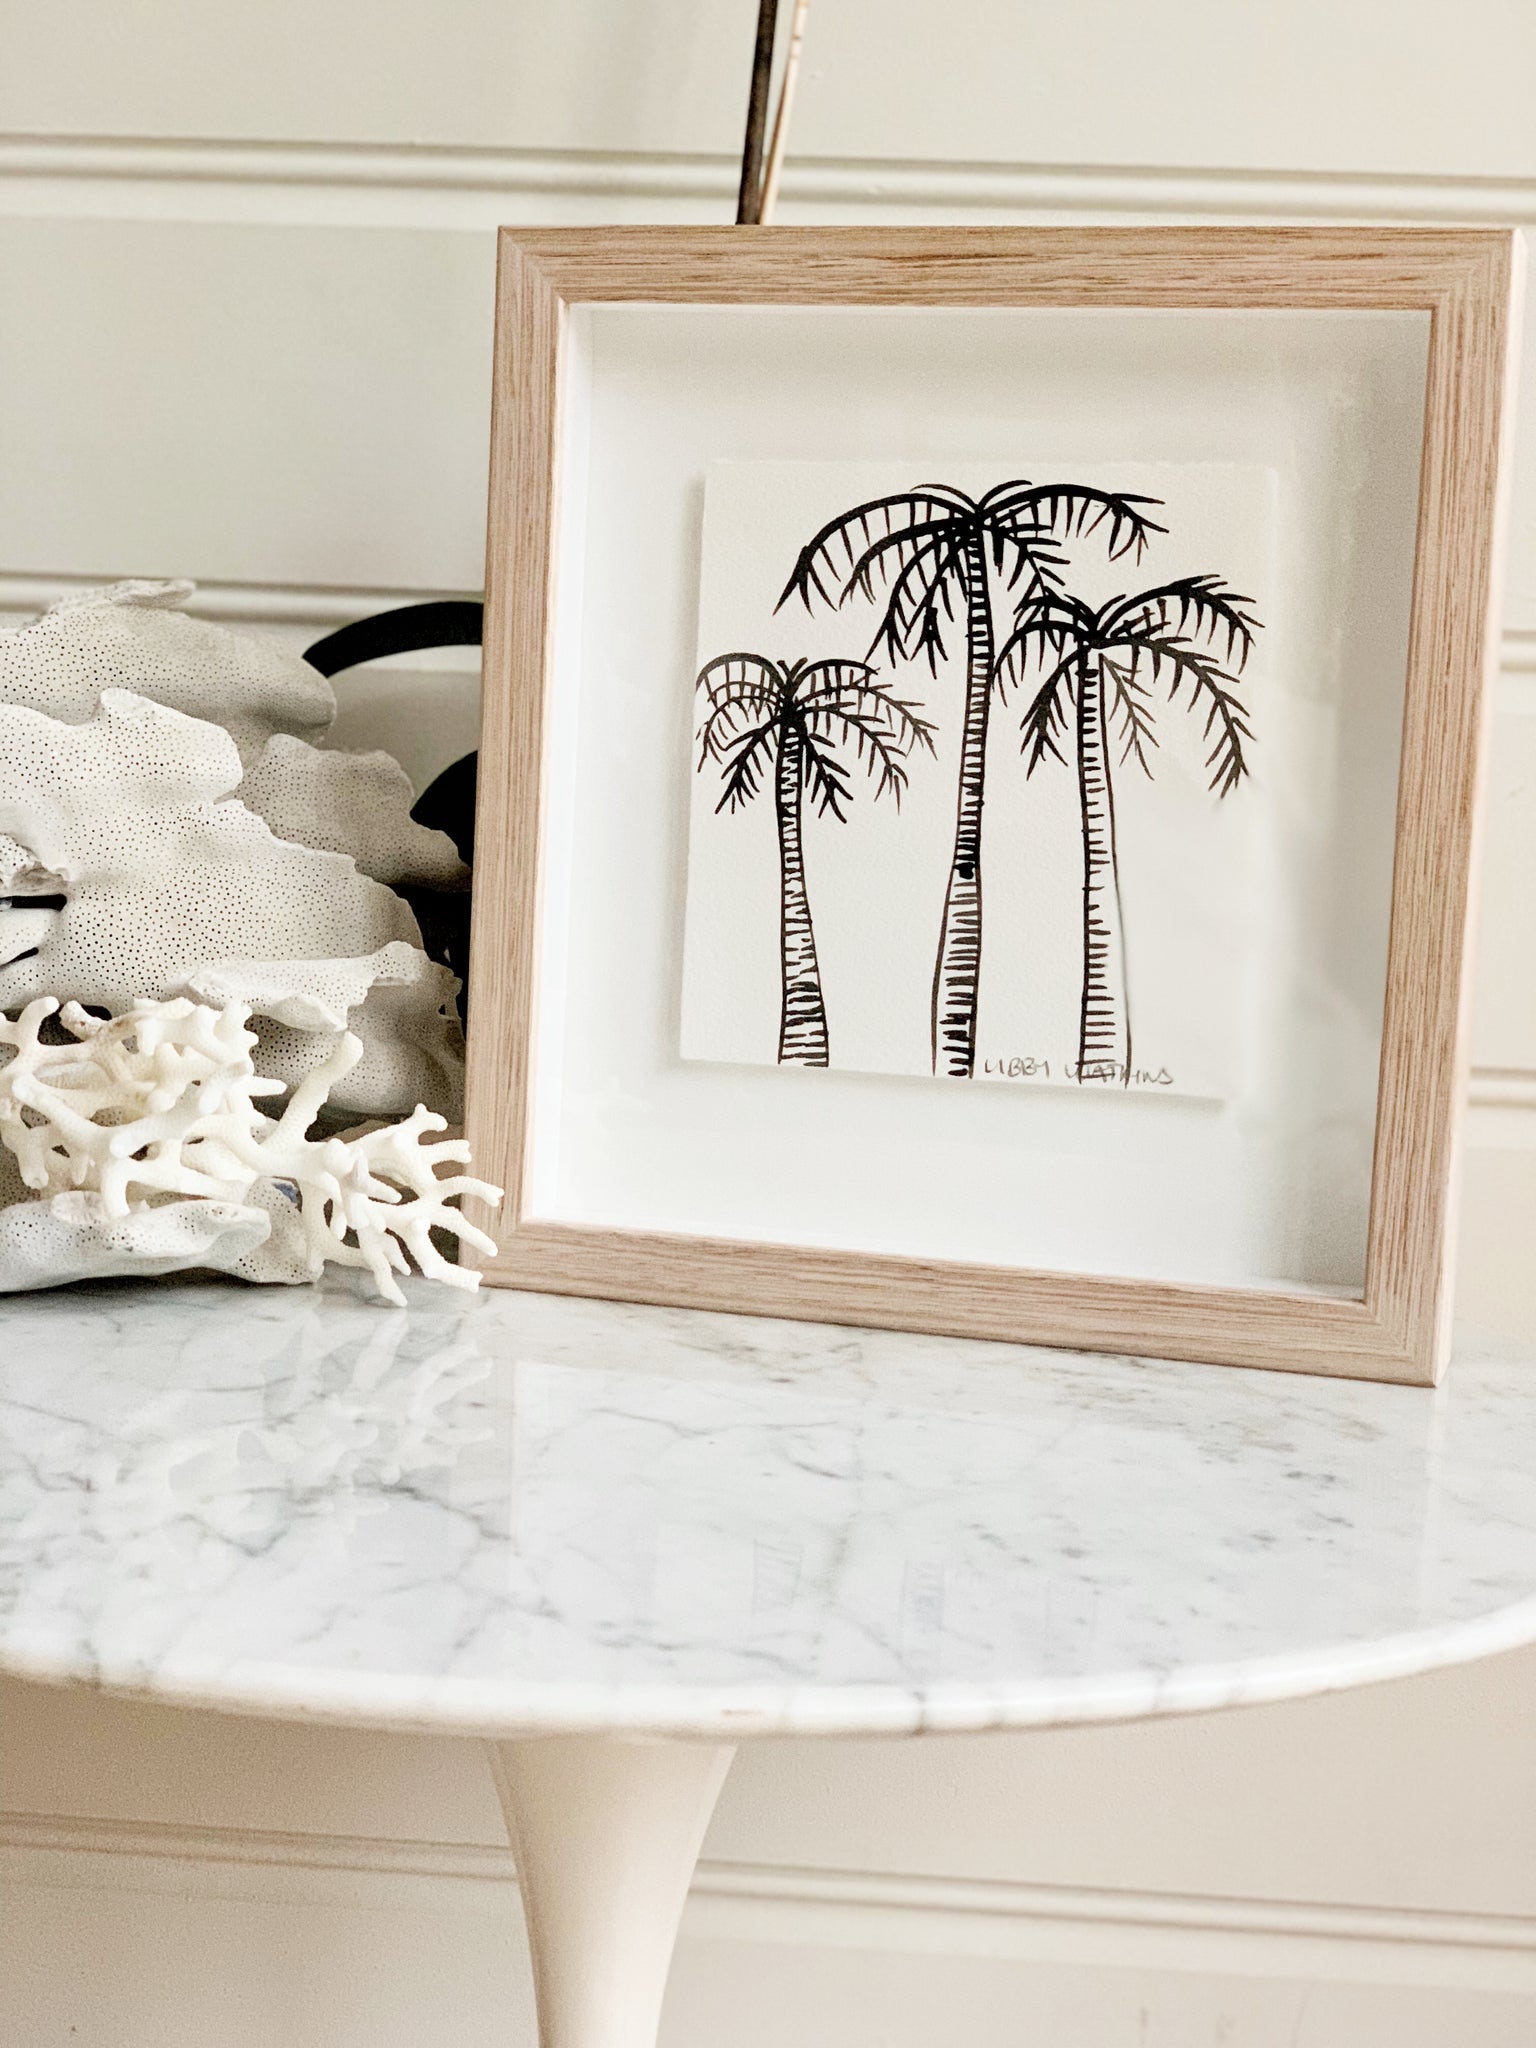 Signature Libby Watkins | Mini Ink Palm | 91804 | Made to order with artist Libby Watkins